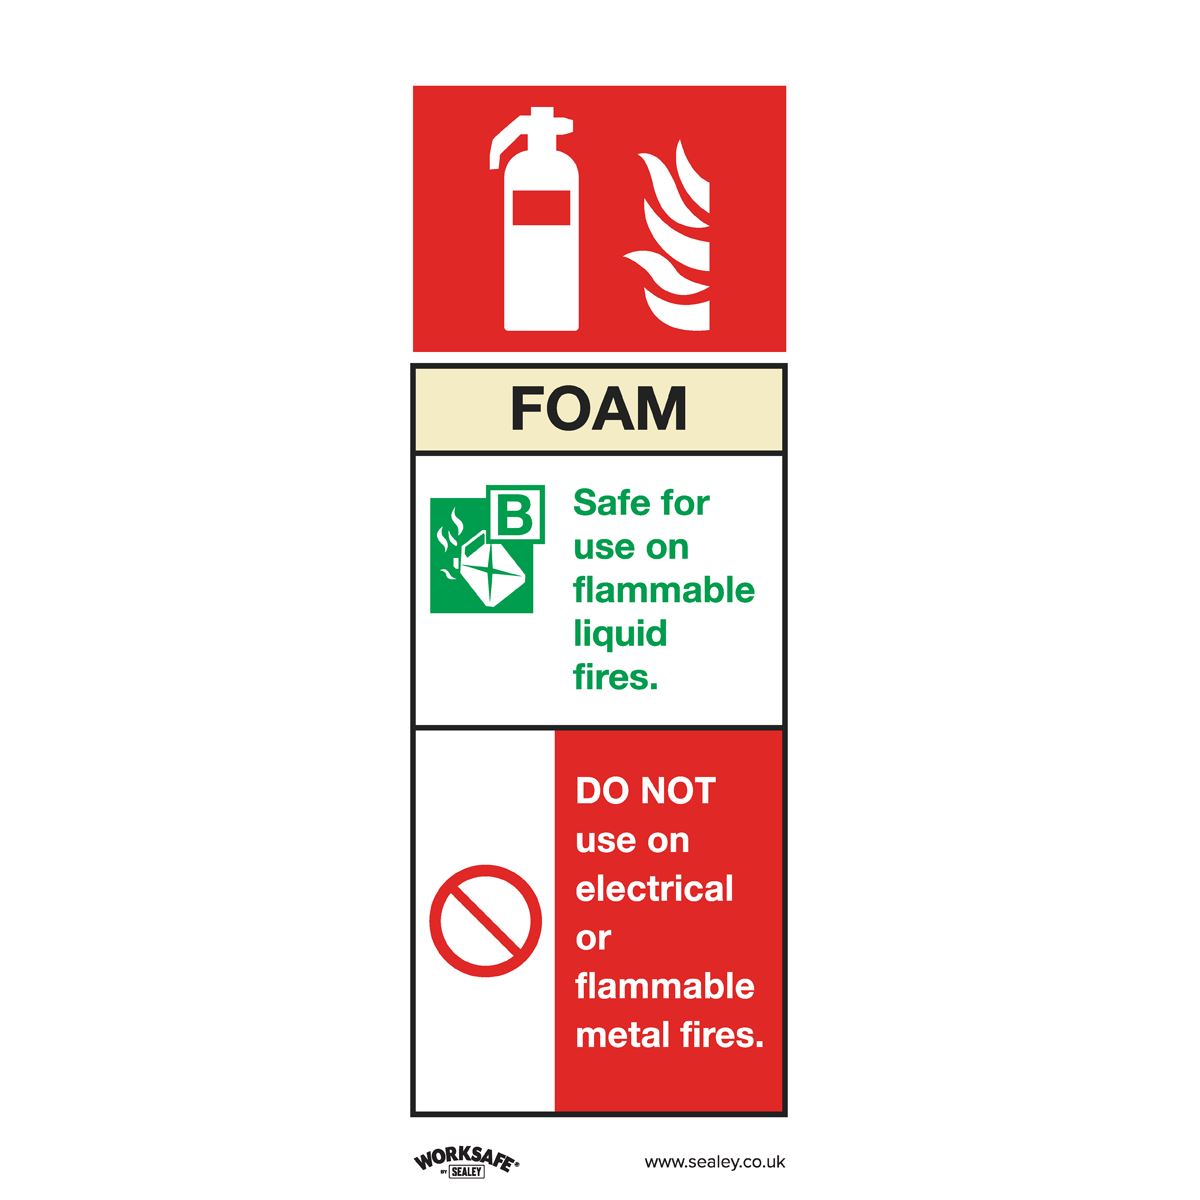 Worksafe by Sealey Safe Conditions Safety Sign - Foam Fire Extinguisher - Self-Adhesive Vinyl